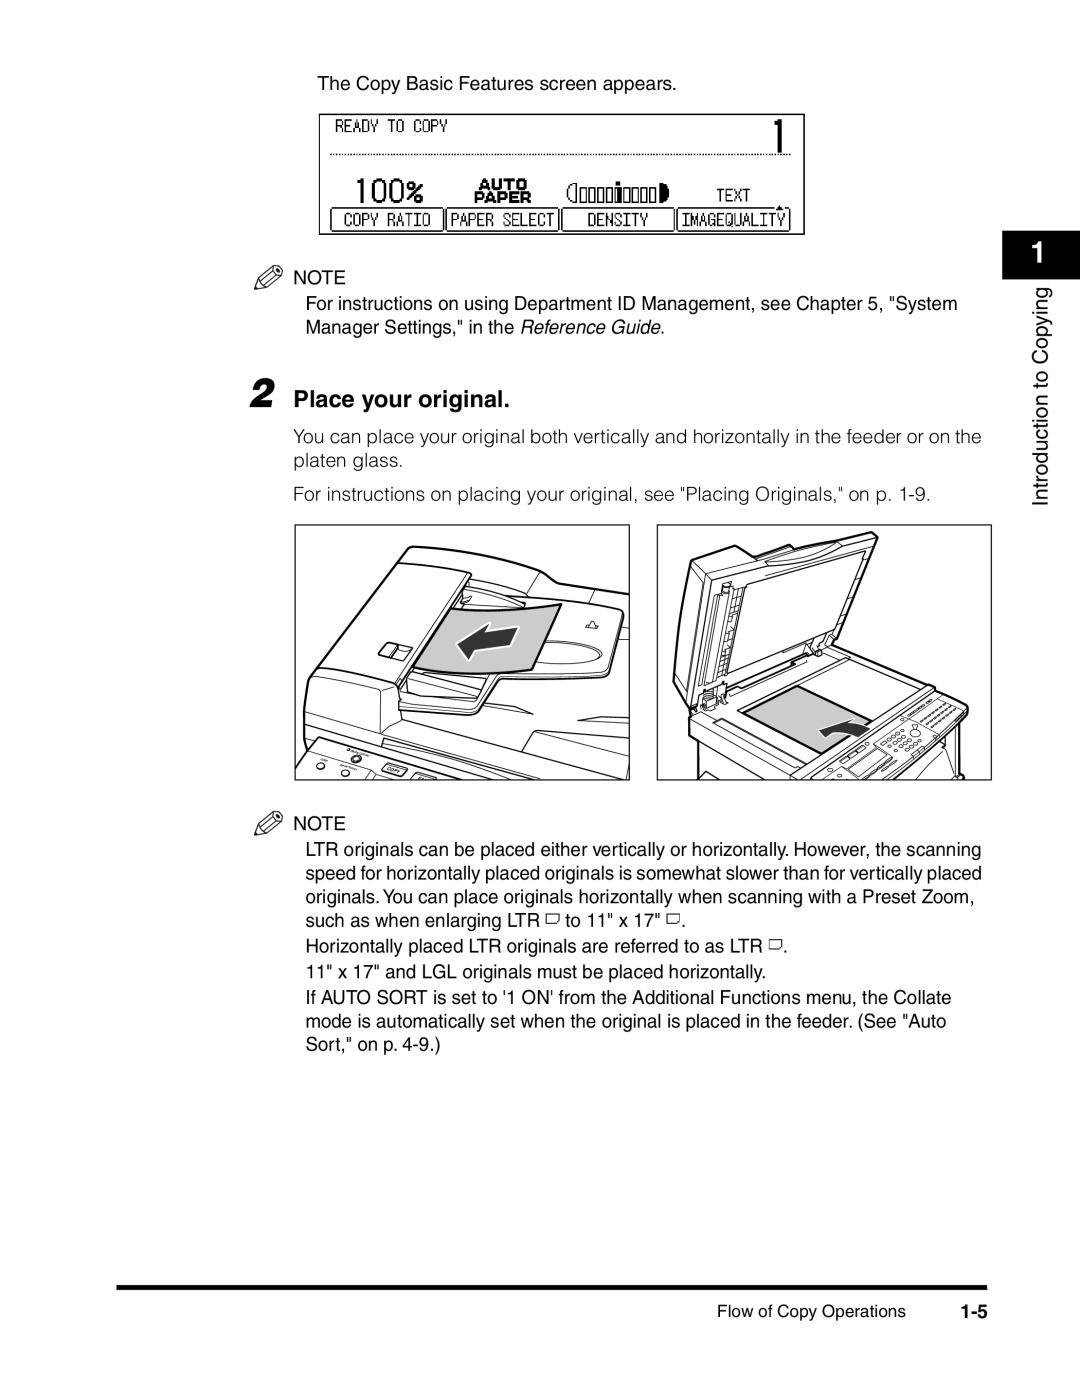 Canon 2300 manual Place your original, Introduction to Copying 